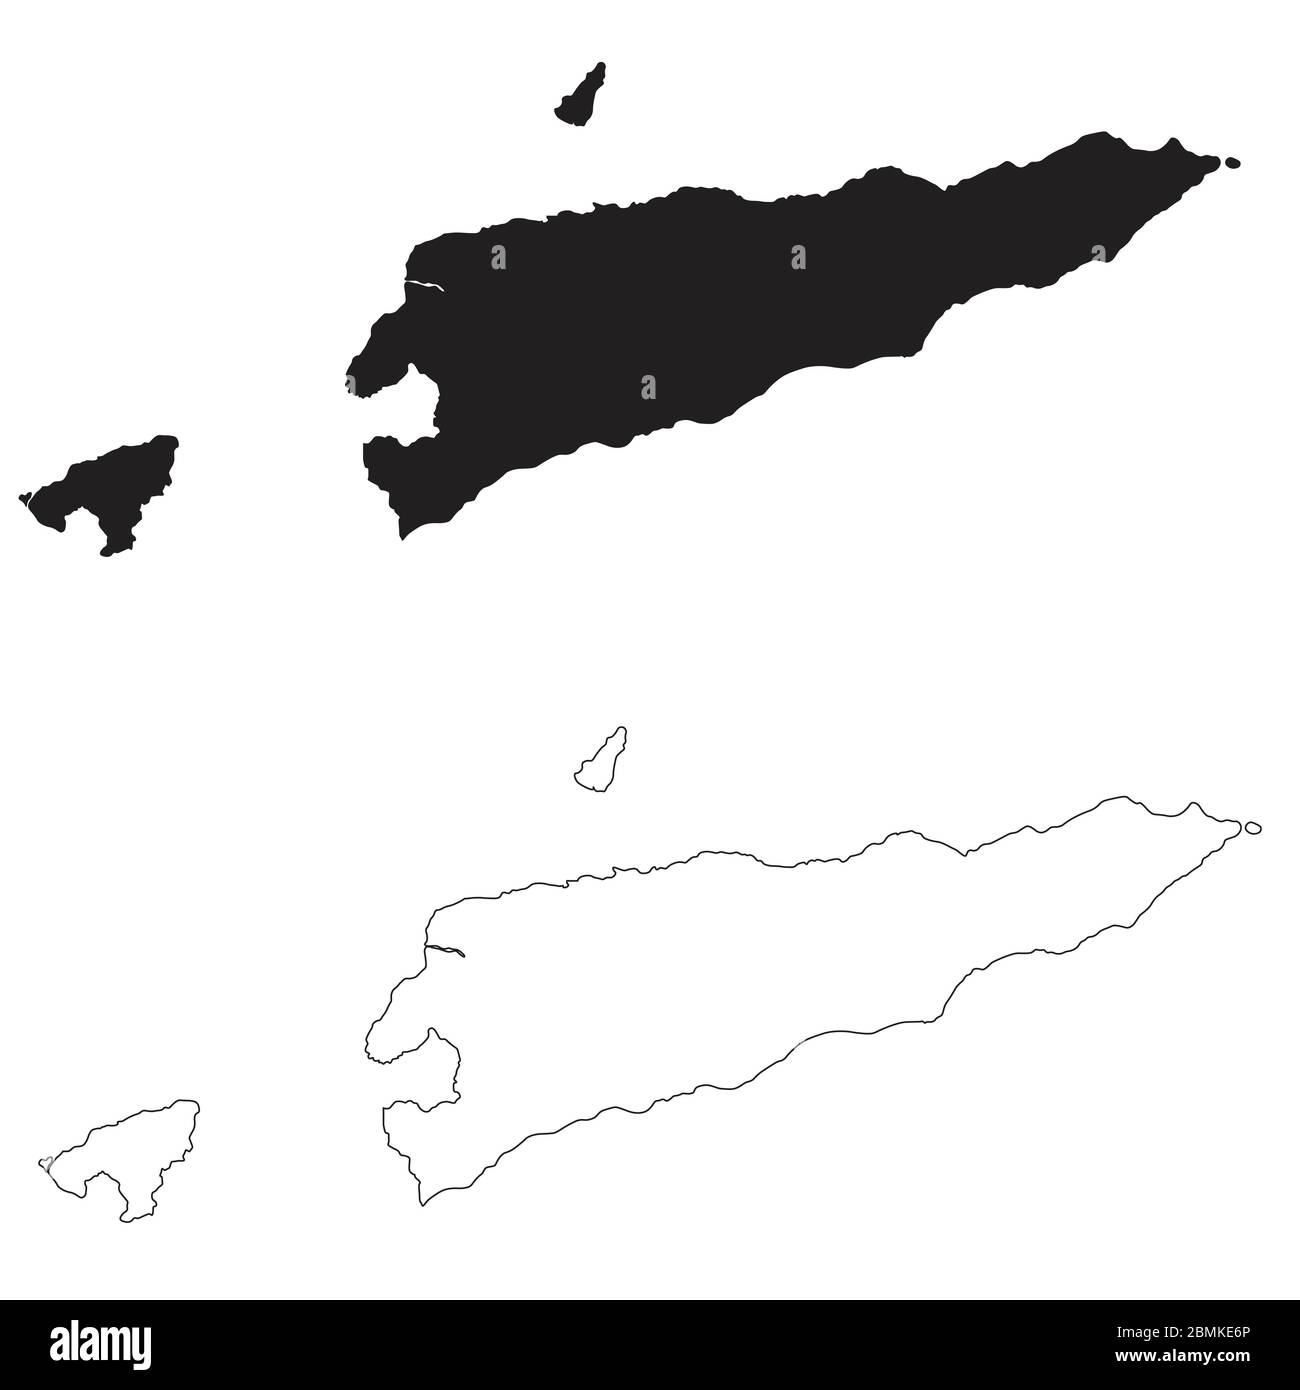 Timor-Leste Country Map. Black silhouette and outline isolated on white background. EPS Vector Stock Vector